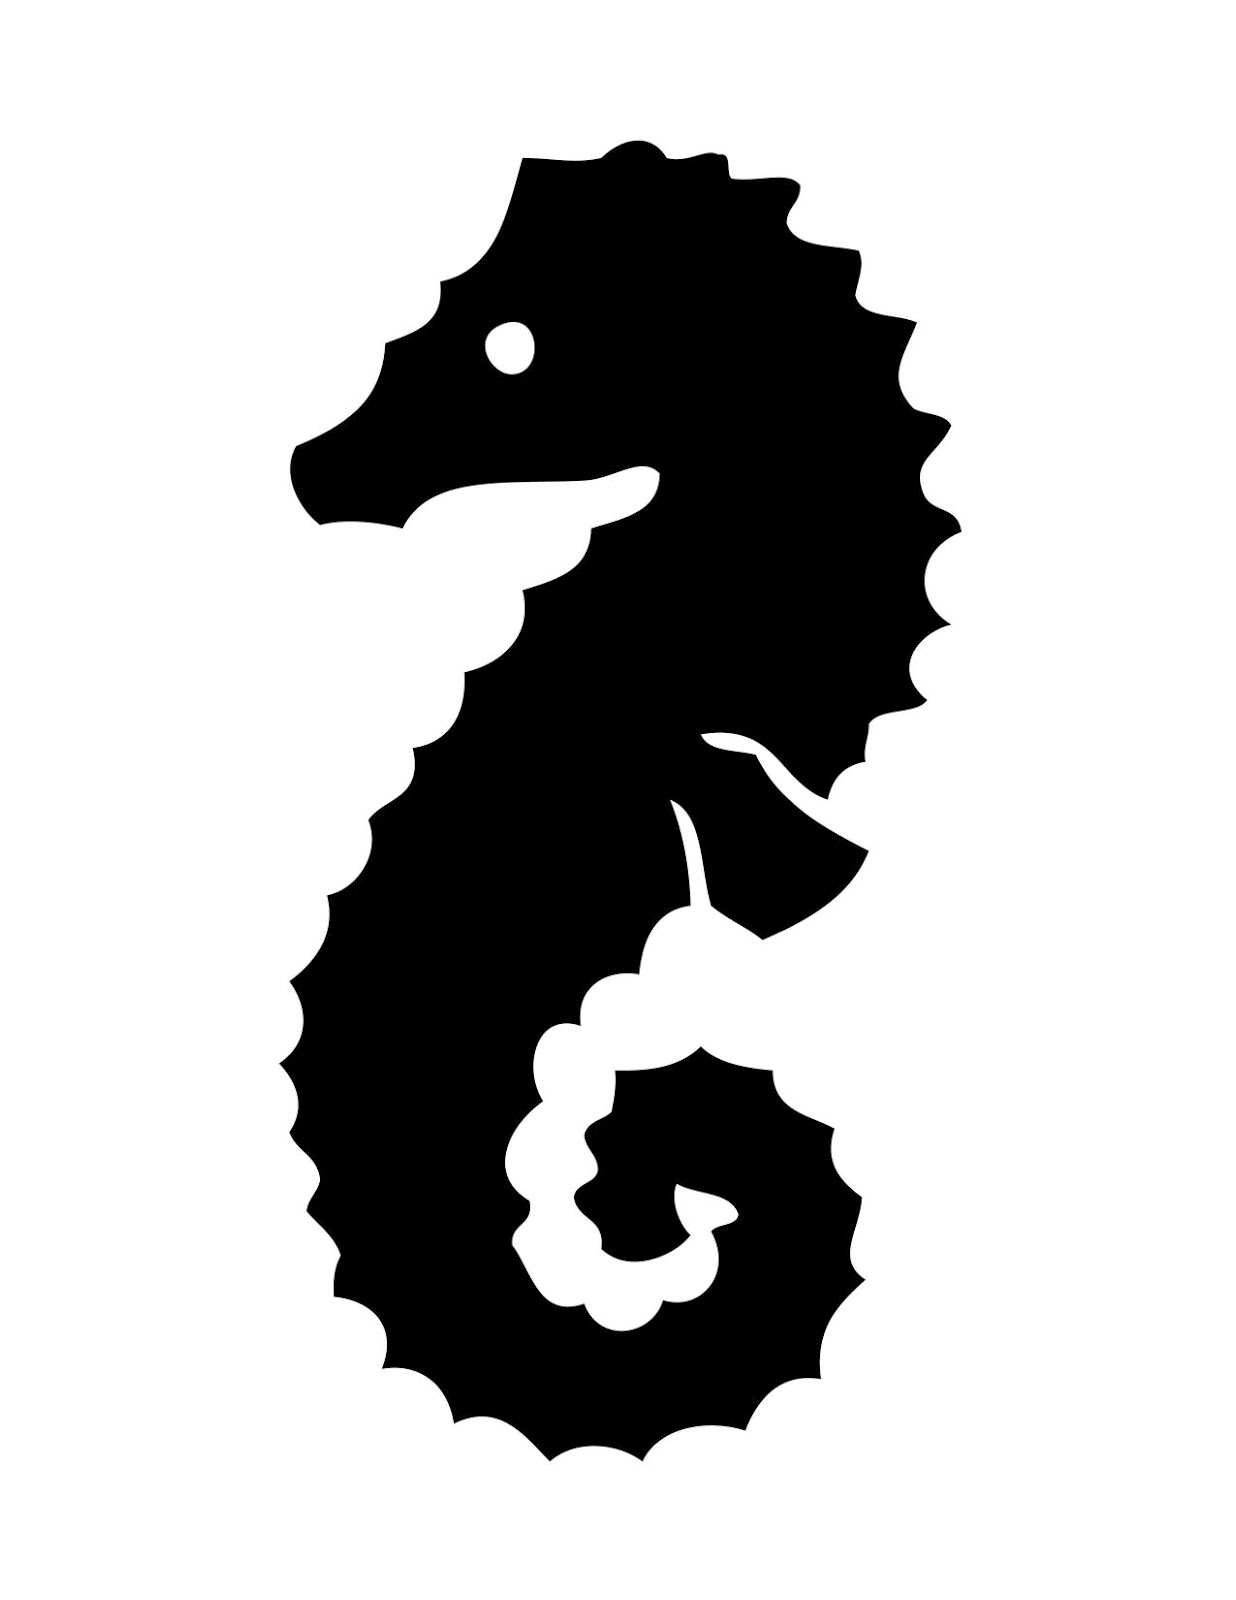 Simple Seahorse Silhouette   Clipart Panda   Free Clipart Images